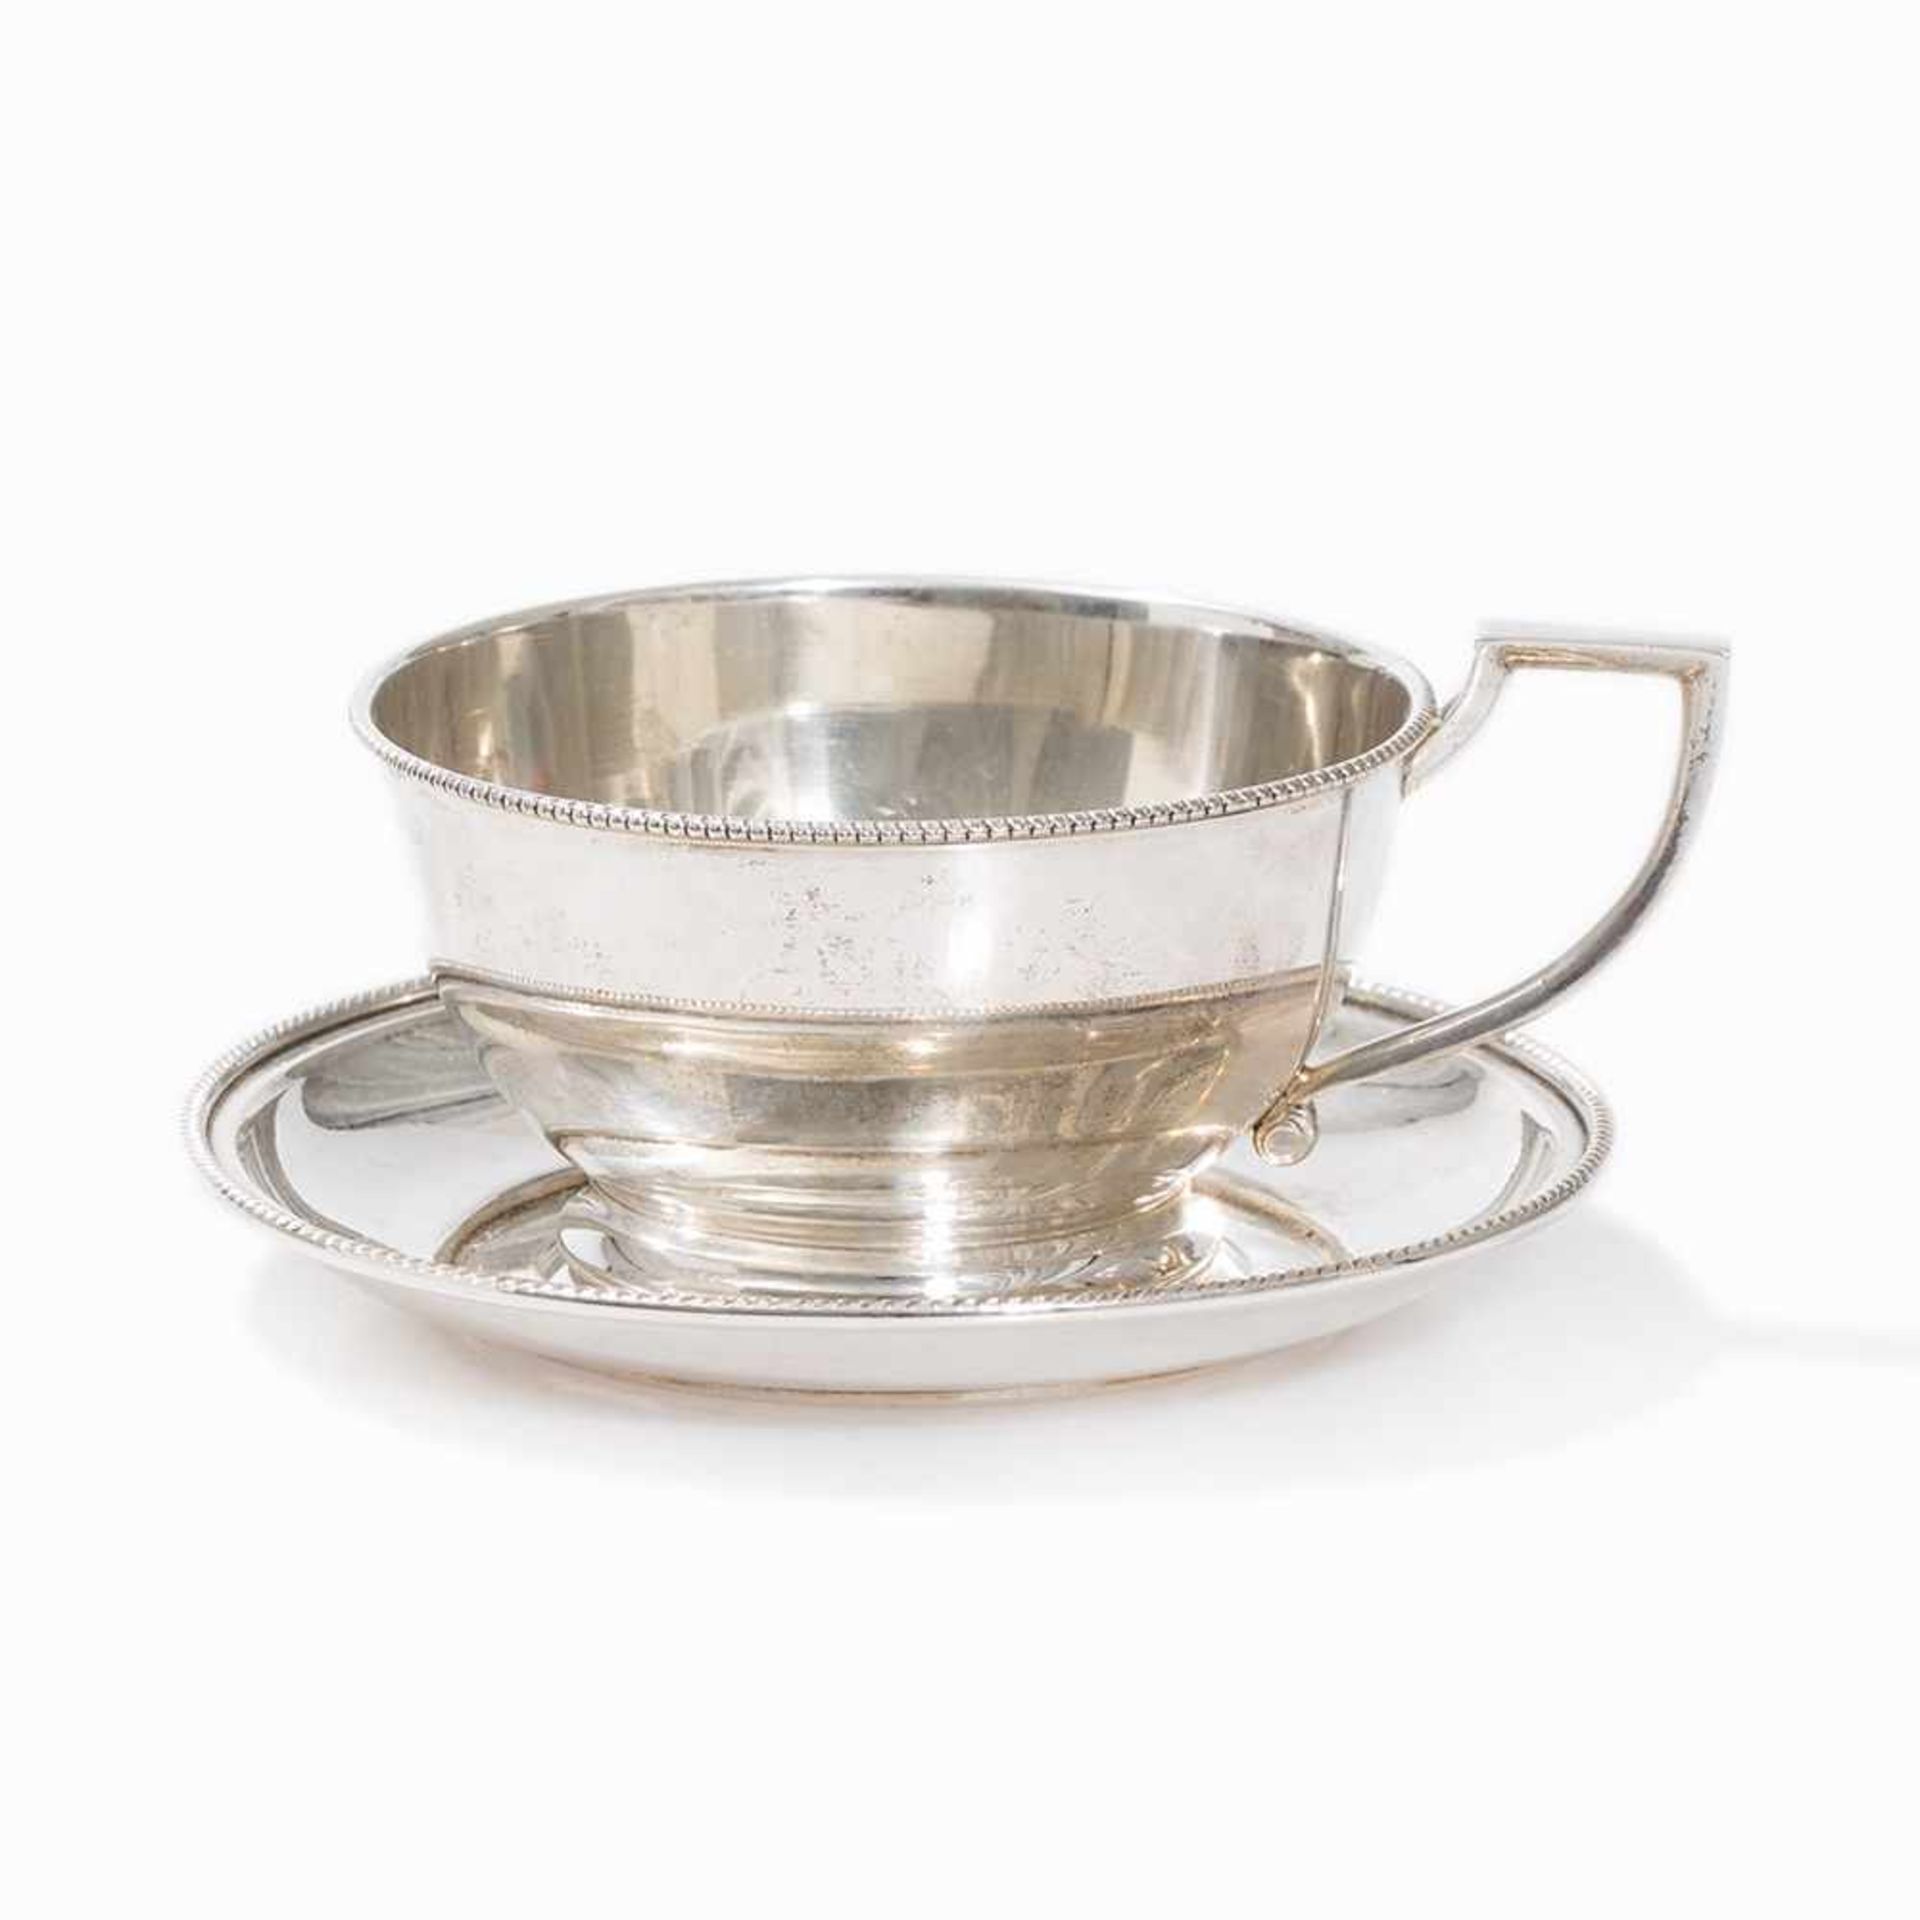 Silver Teacup with matching Saucer, Austria-Hungary, c. 1890 800 silver, cast and chased Austria, - Bild 9 aus 9